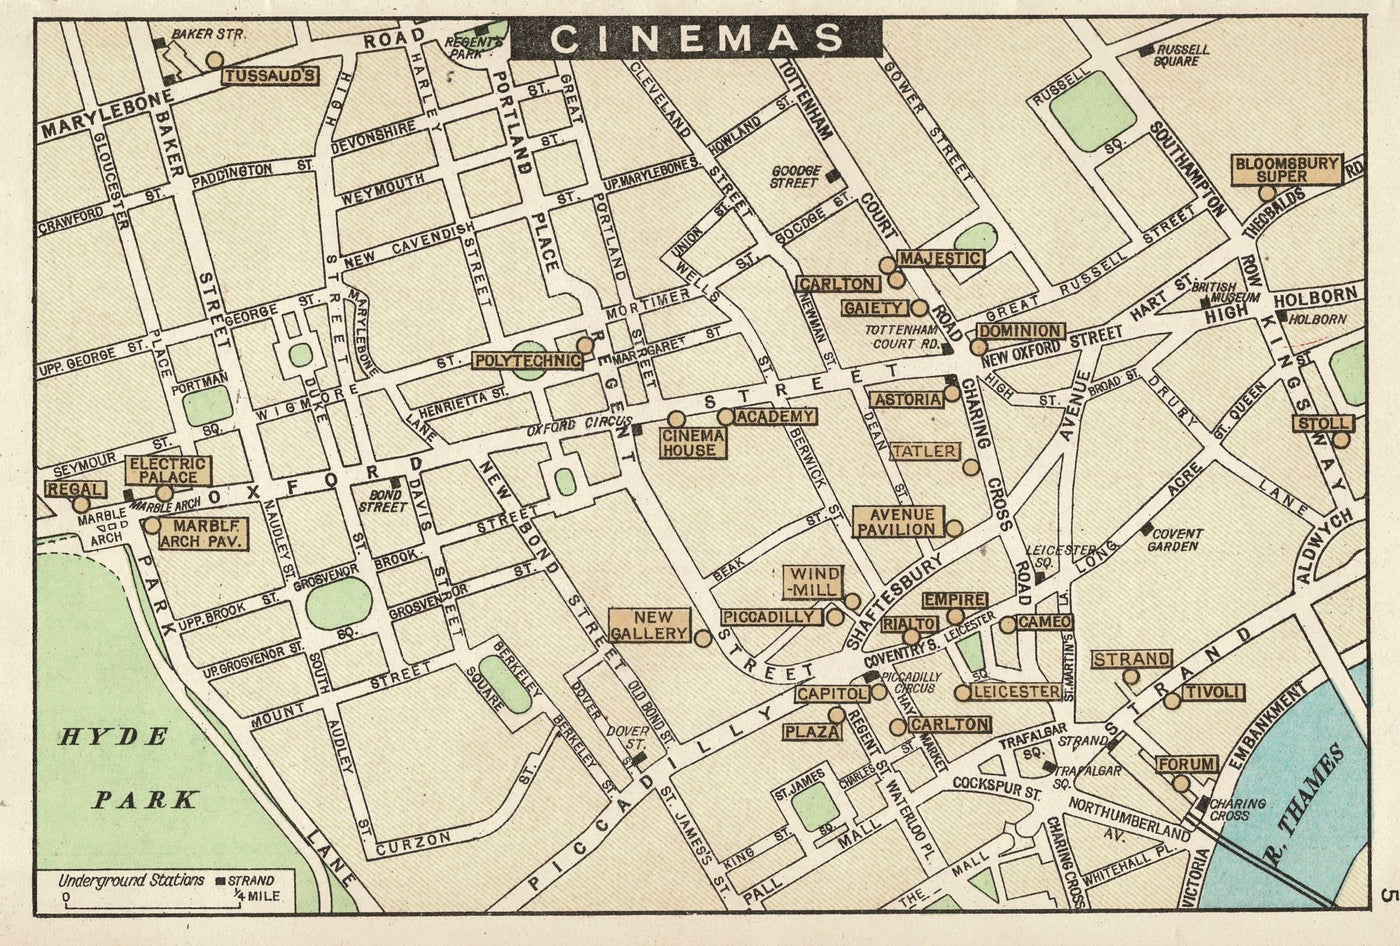 Cinemas in Central London map published in 1926